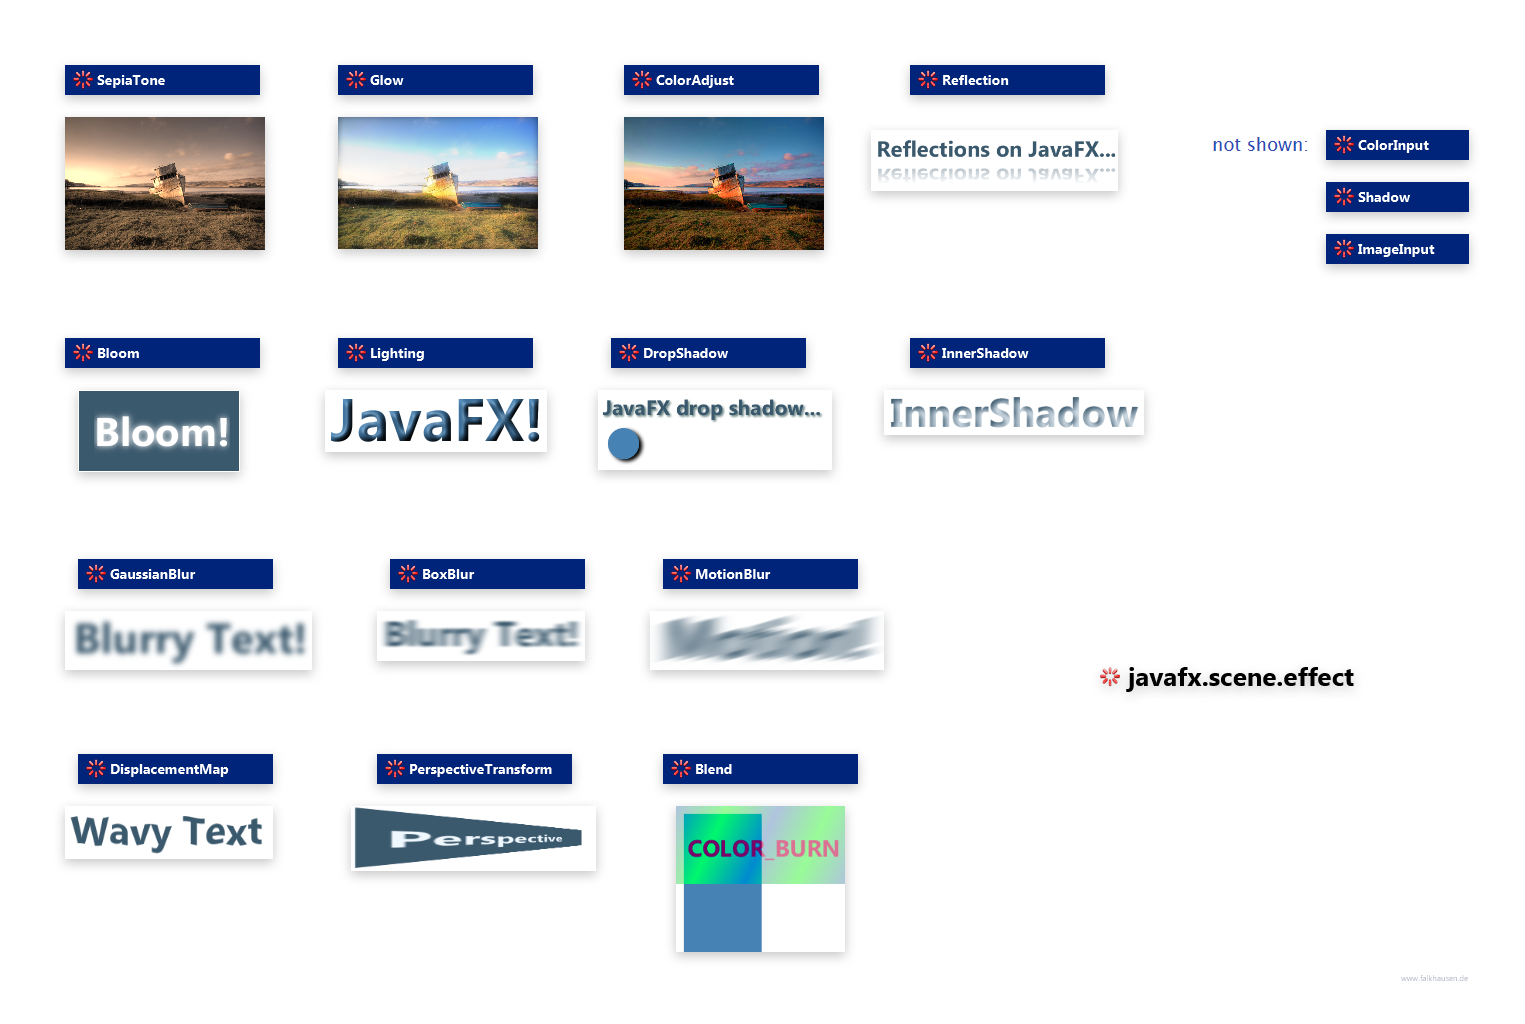 javafx.scene.effect Effect examples class diagram and api documentation for JavaFX 10